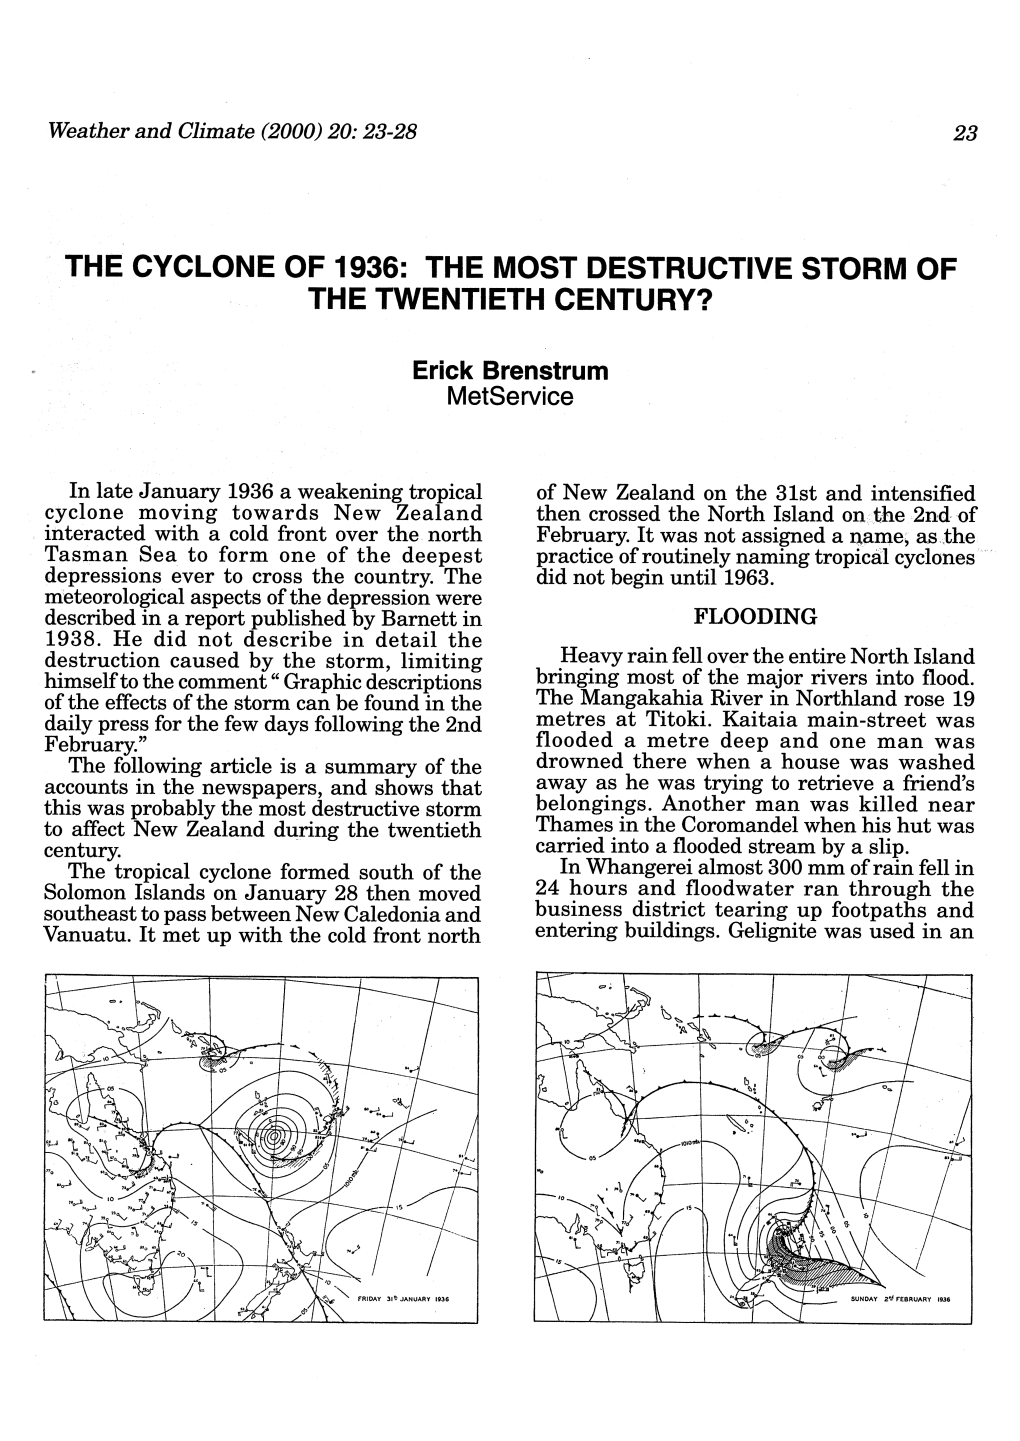 The Cyclone of 1936: the Most Destructive Storm of the Twentieth Century?